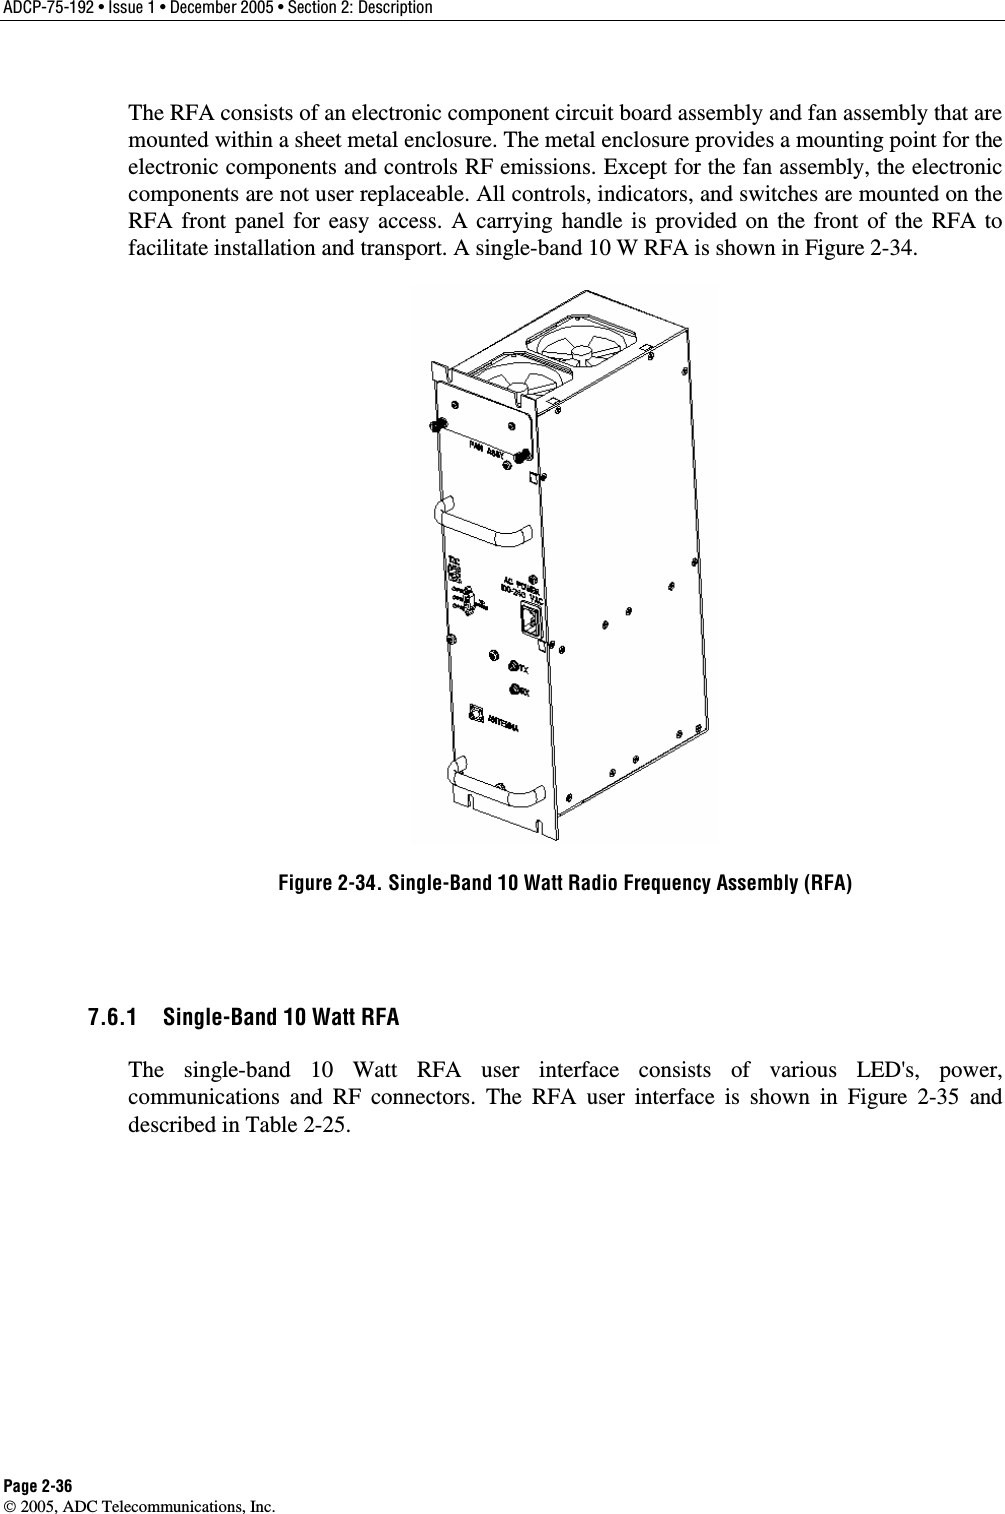 ADCP-75-192 • Issue 1 • December 2005 • Section 2: Description Page 2-36  2005, ADC Telecommunications, Inc. The RFA consists of an electronic component circuit board assembly and fan assembly that are mounted within a sheet metal enclosure. The metal enclosure provides a mounting point for the electronic components and controls RF emissions. Except for the fan assembly, the electronic components are not user replaceable. All controls, indicators, and switches are mounted on the RFA front panel for easy access. A carrying handle is provided on the front of the RFA to facilitate installation and transport. A single-band 10 W RFA is shown in Figure 2-34.   Figure 2-34. Single-Band 10 Watt Radio Frequency Assembly (RFA)  7.6.1  Single-Band 10 Watt RFA The single-band 10 Watt RFA user interface consists of various LED&apos;s, power, communications and RF connectors. The RFA user interface is shown in Figure 2-35 and described in Table 2-25.  